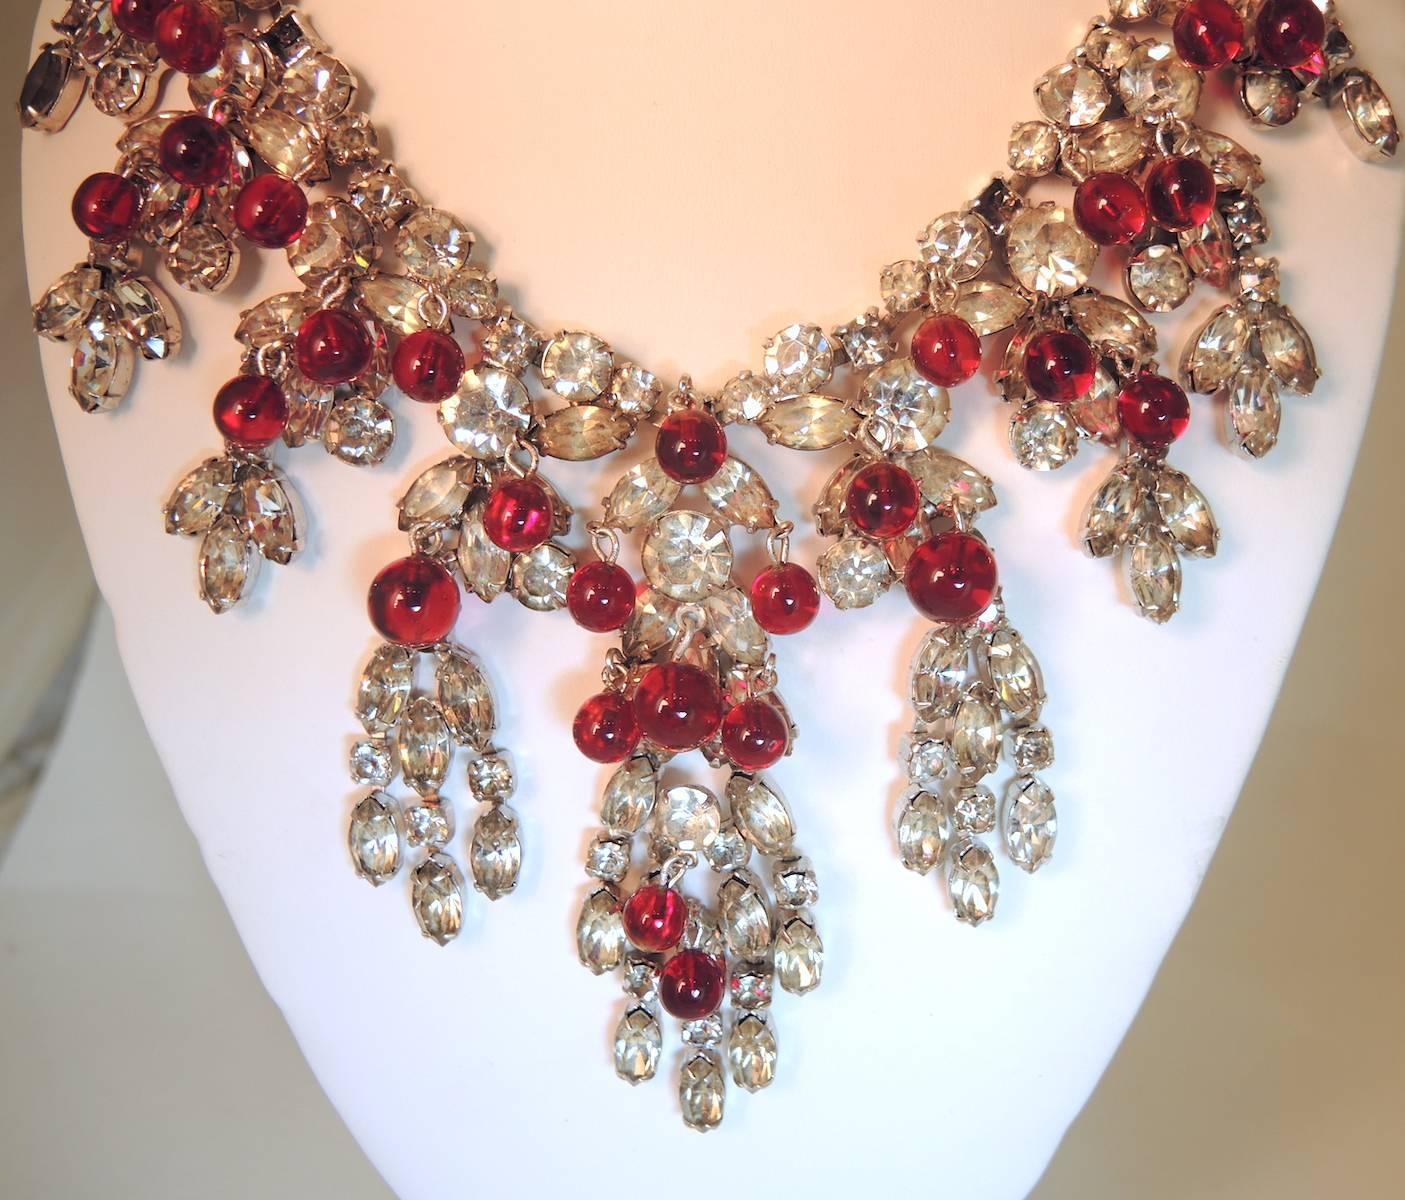 This stunning necklace by Kramer features red poured glass cabochons with cascading cluster of clear crystals in a silver-tone setting.  This piece measures 16” x 3-1/2” at the widest part.  It is signed “Kramer” and is in excellent condition.  